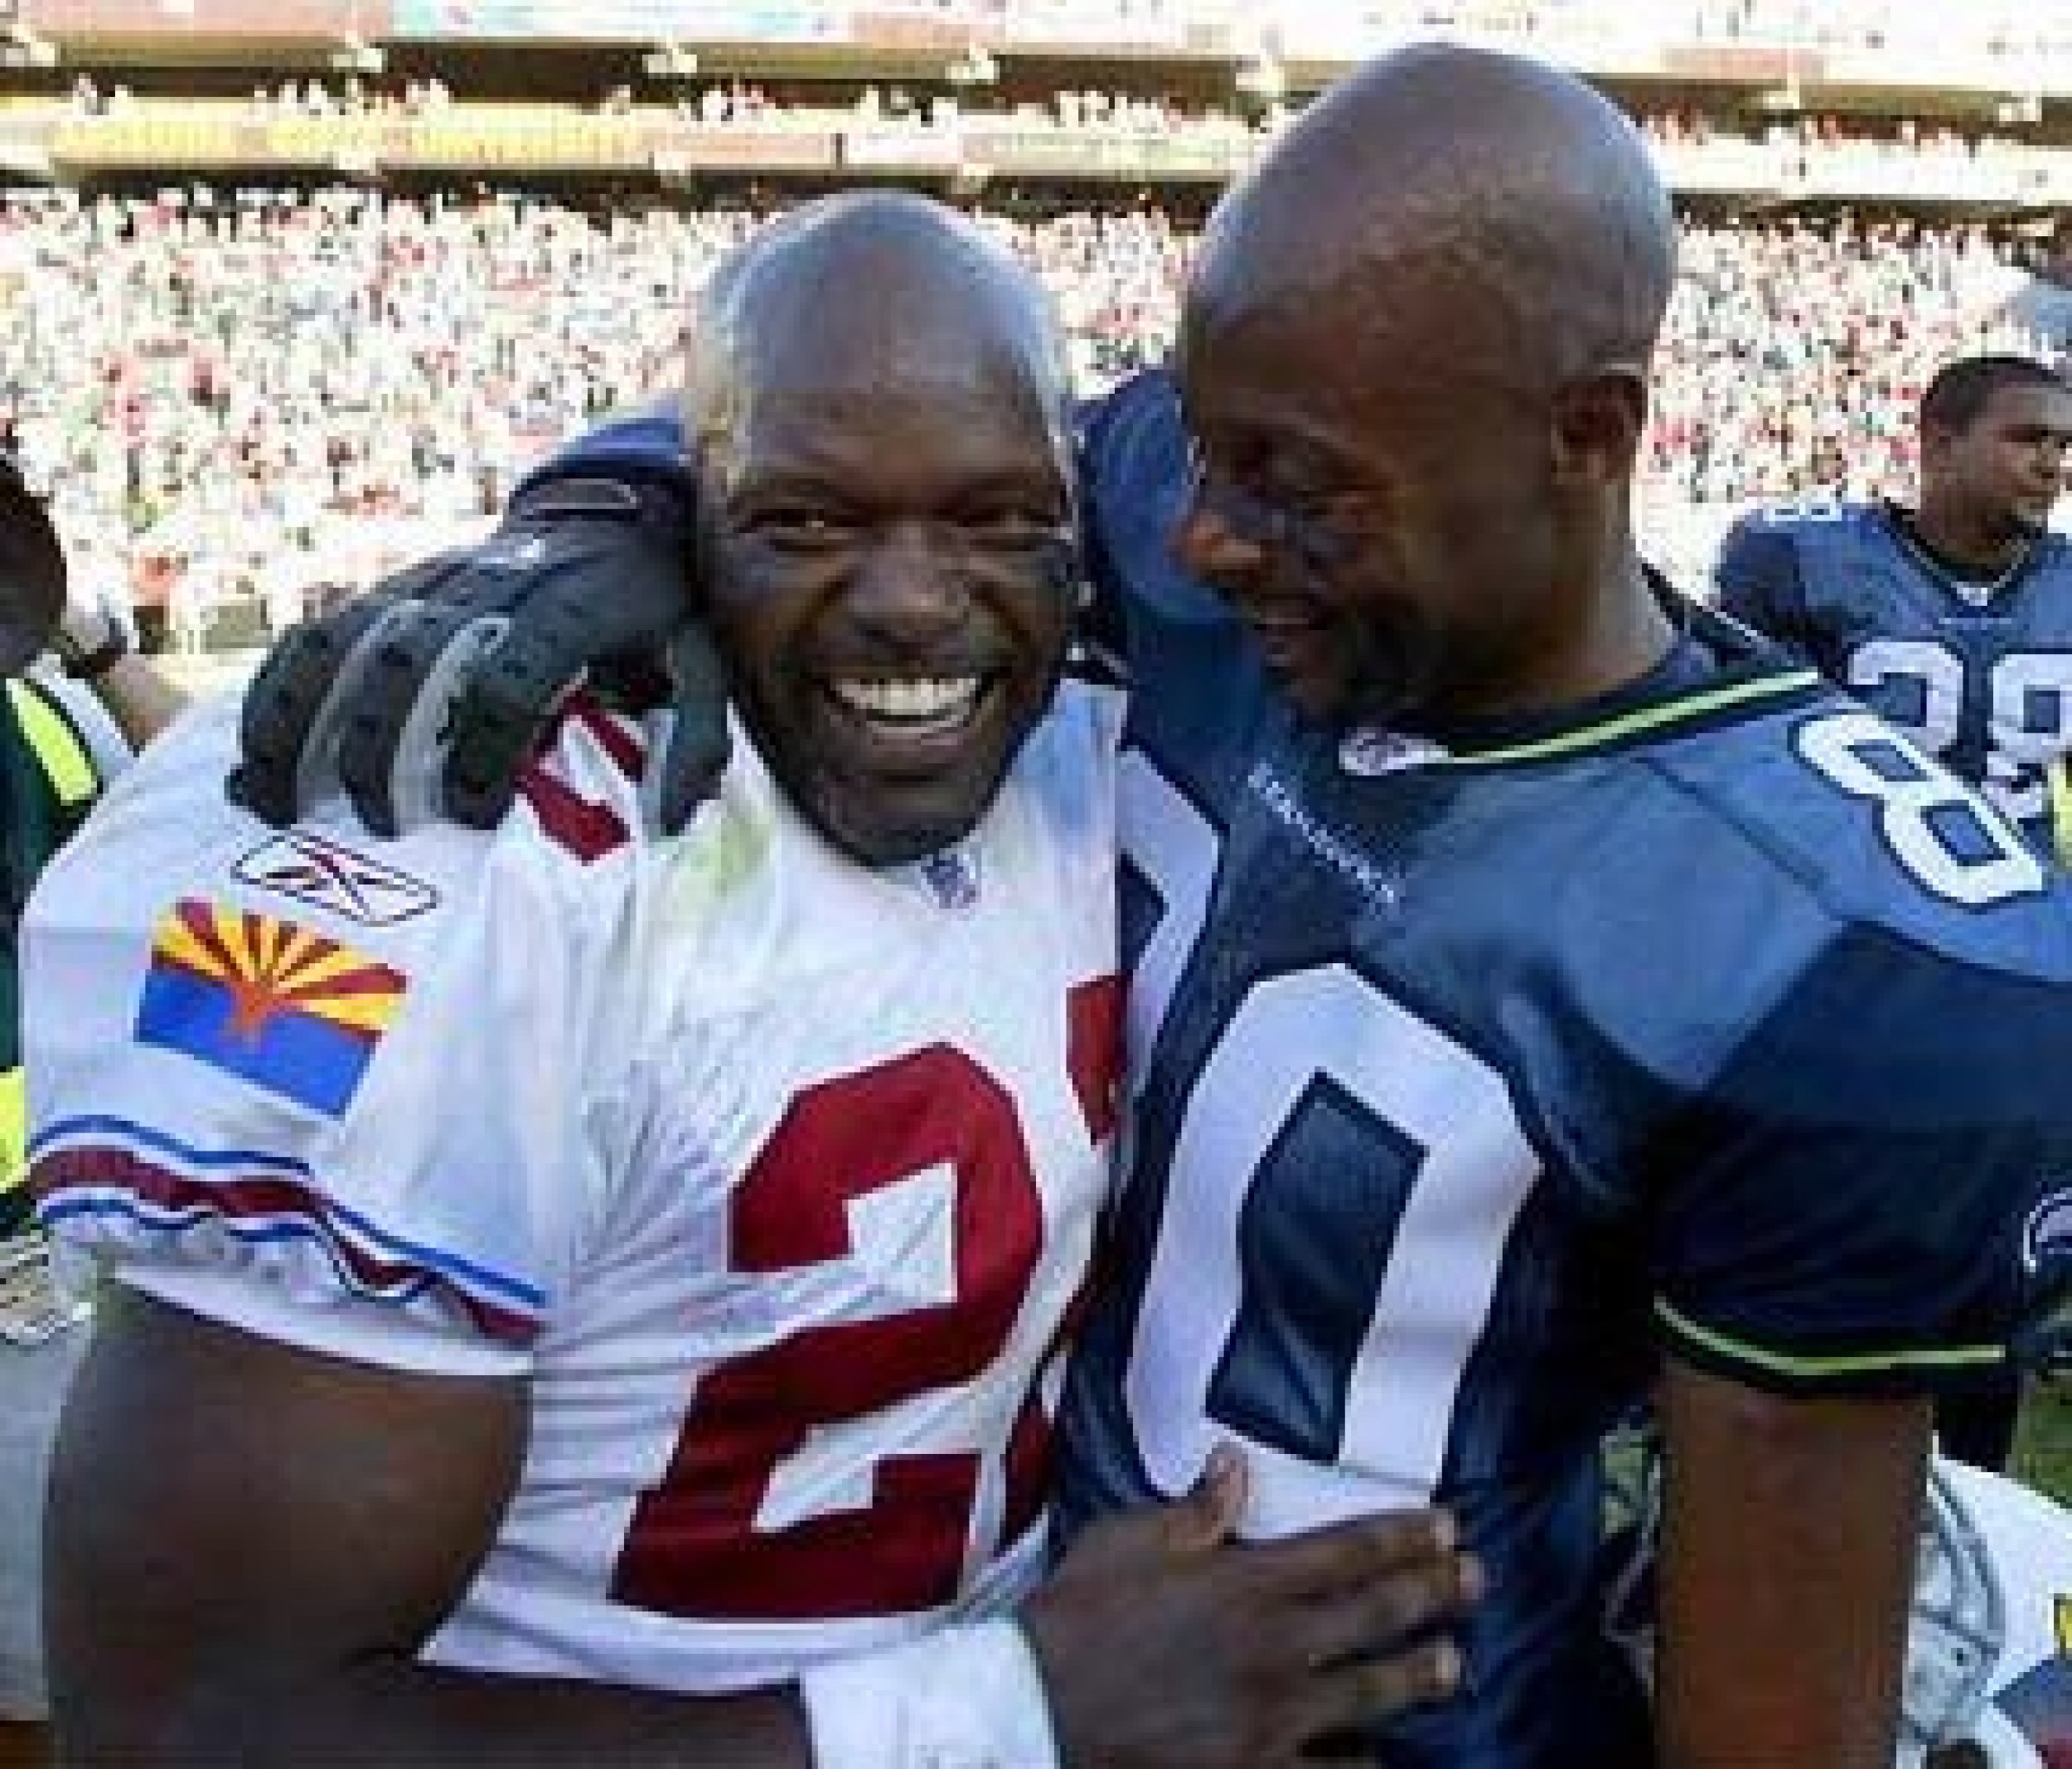 This photo just isnt right. The NFLs all-time leading rusher Emmet Smith and all-time leading reciever Jerry Rice embrace in foreign colors.